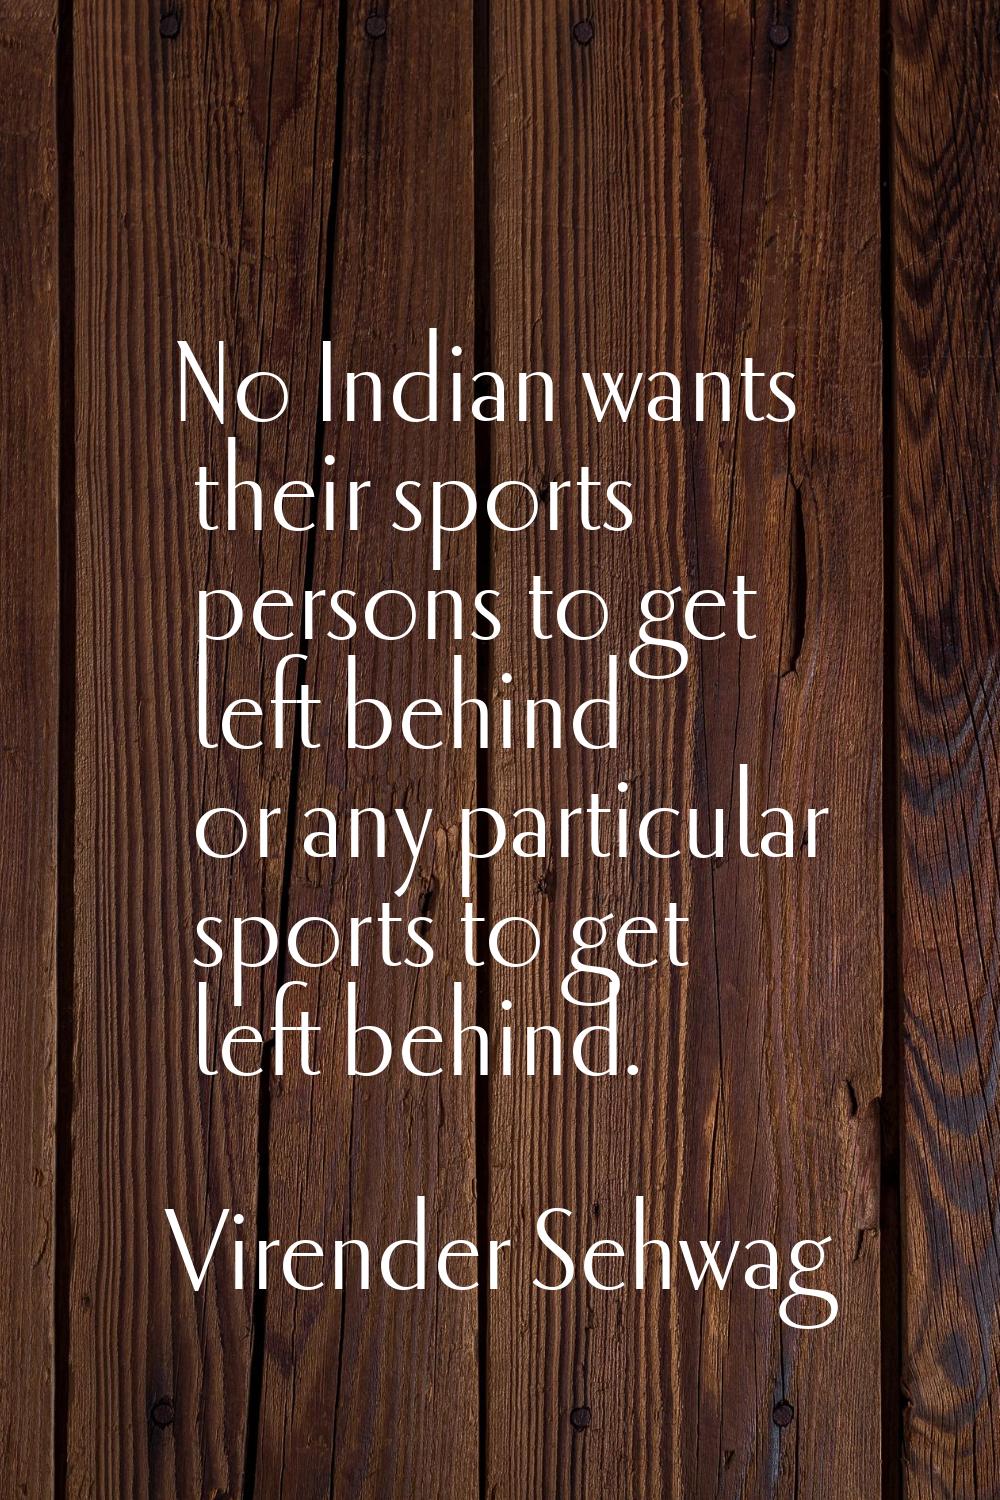 No Indian wants their sports persons to get left behind or any particular sports to get left behind